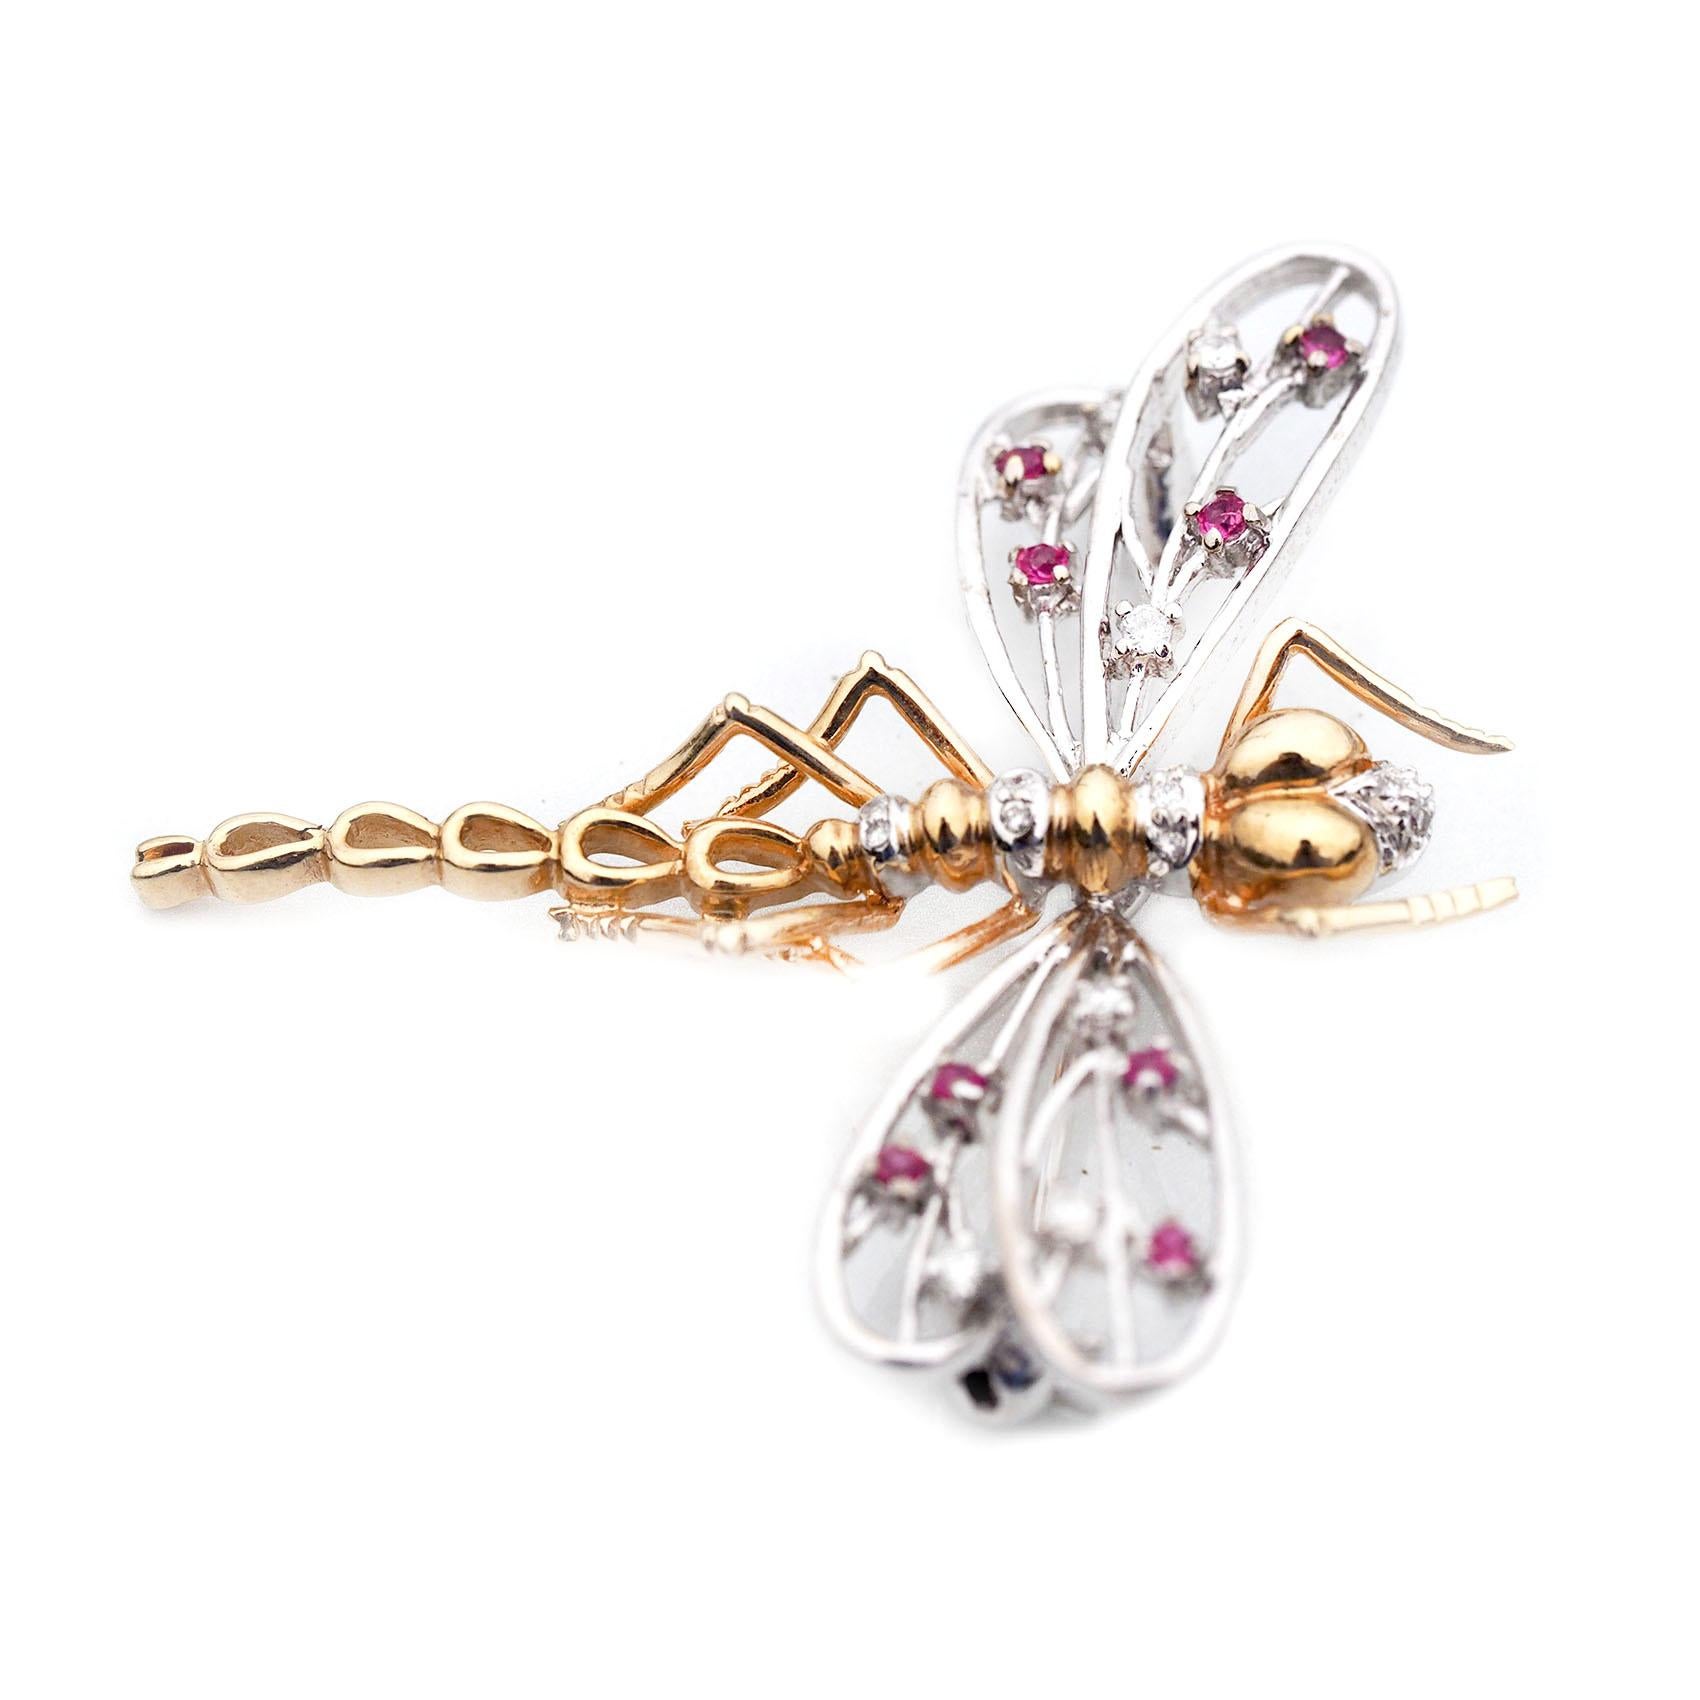 Round Cut 14 Karat Yellow and White Gold Dragonfly Pin with Rubies and Diamonds